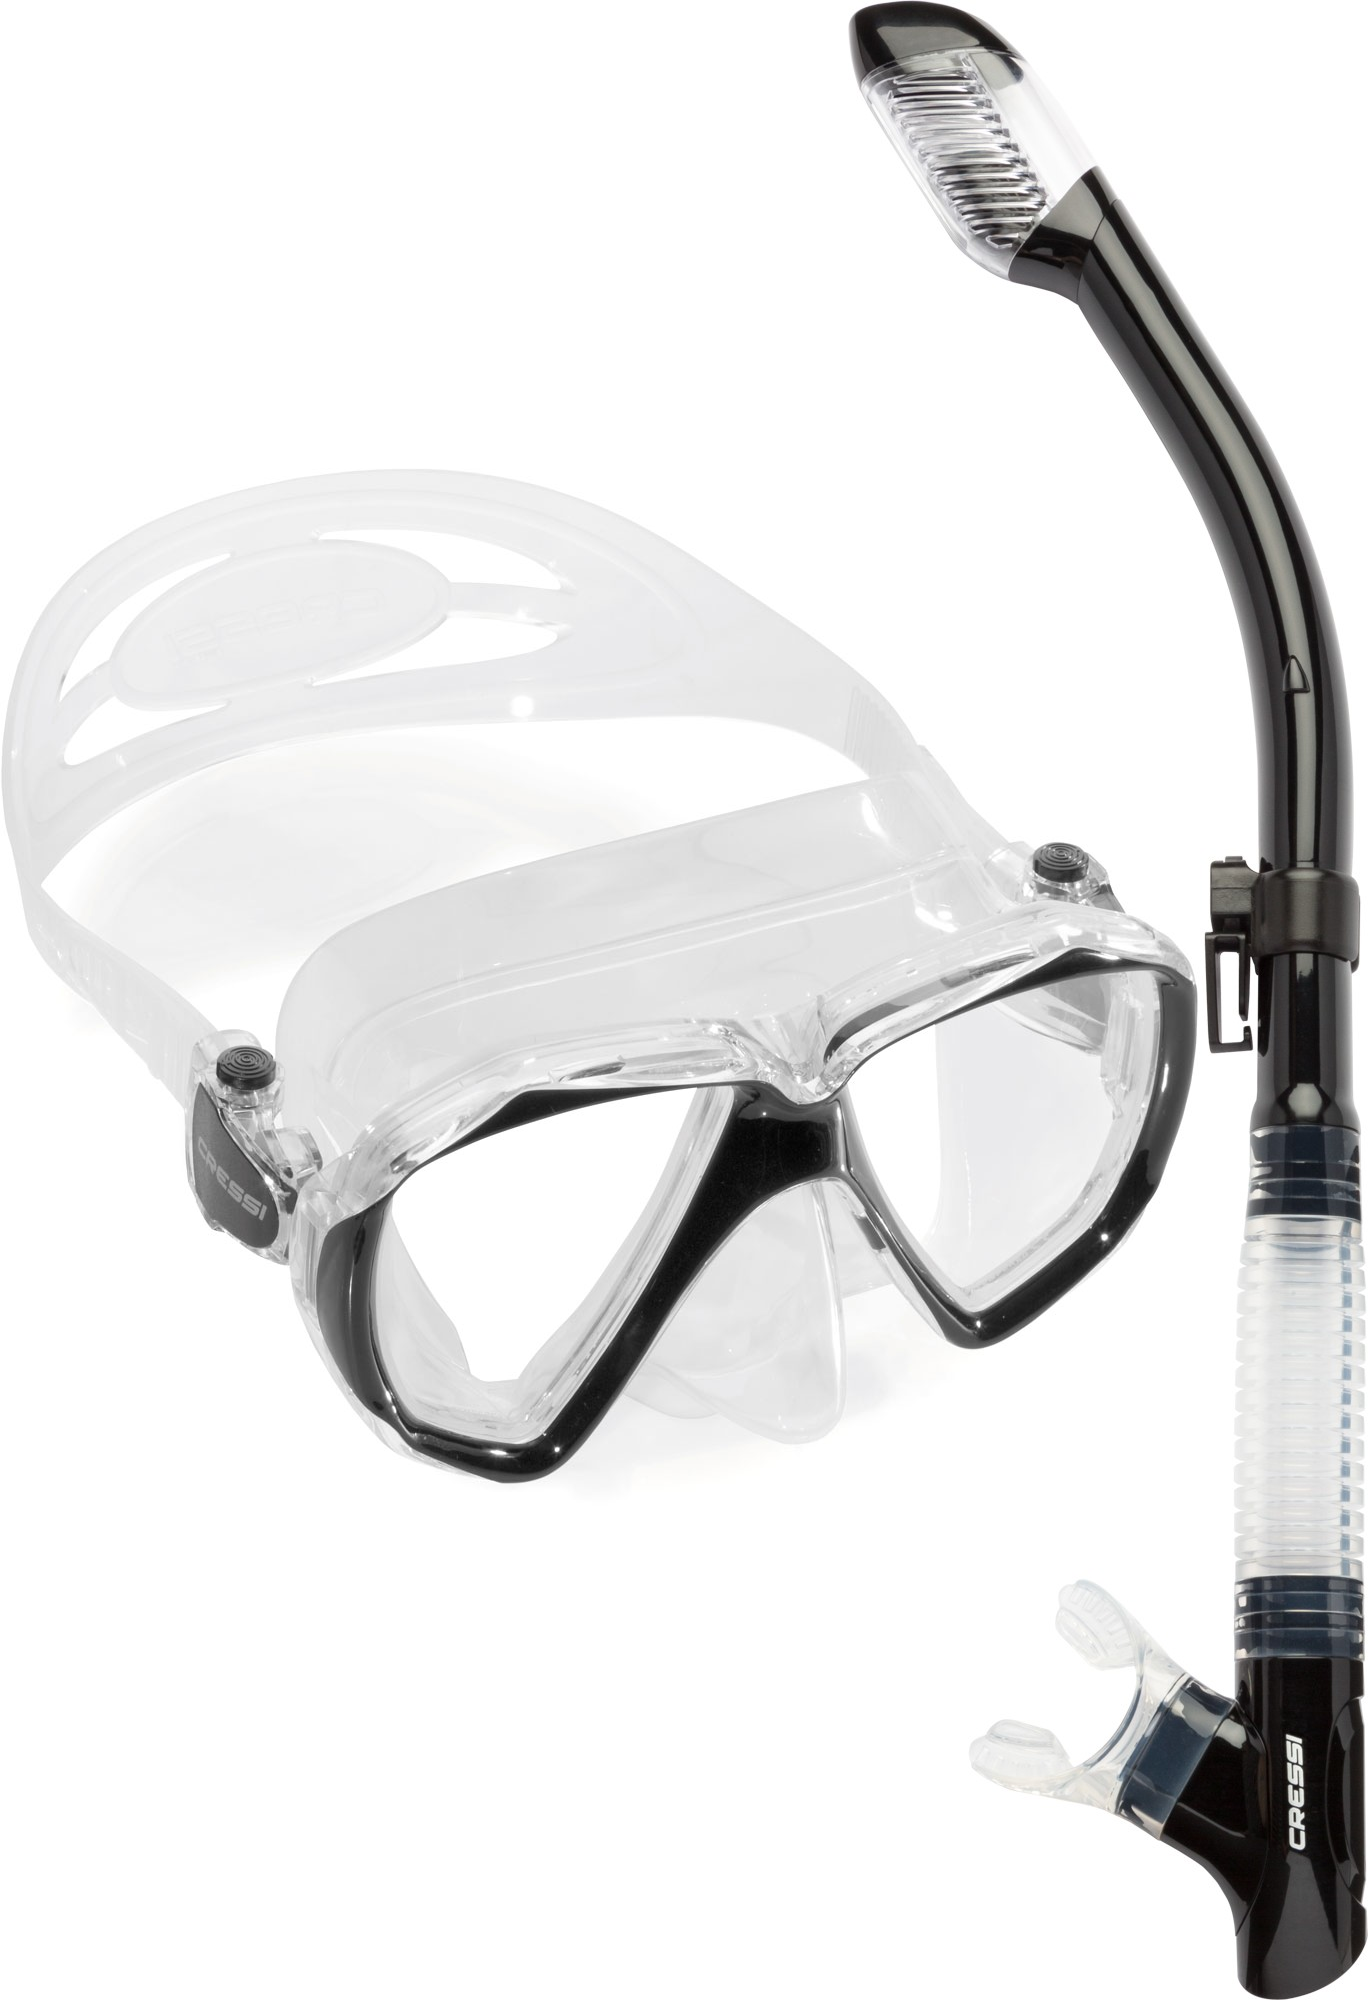 Cressi Adult Ranger Mask and Tao Snorkel Сombo 